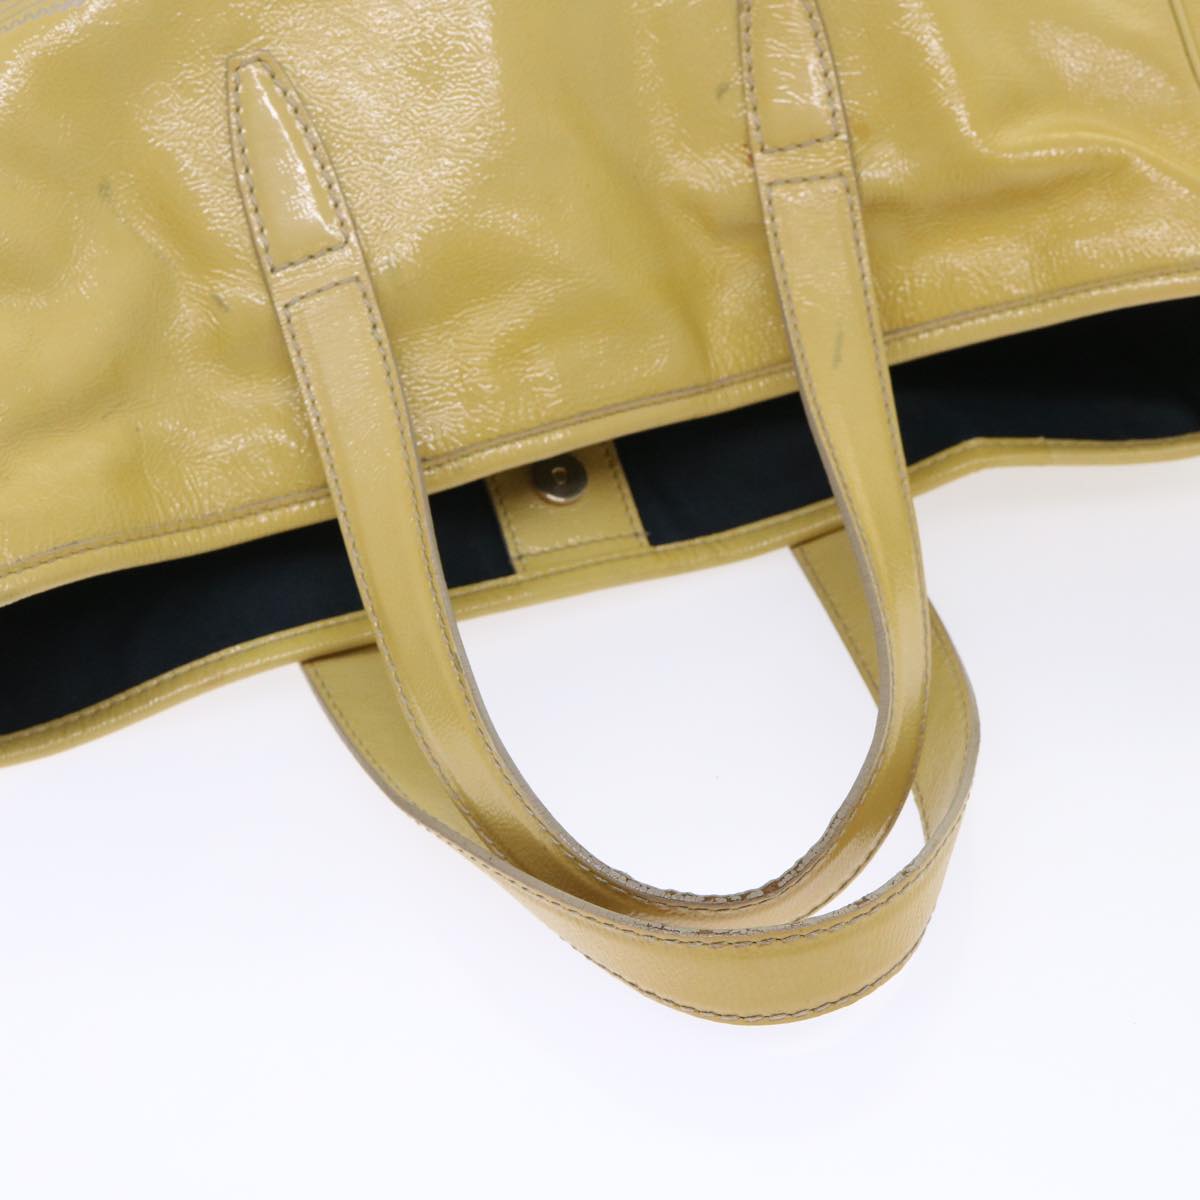 SAINT LAURENT Y Mail Tote Bag Patent leather Yellow 188651 Auth yk7771